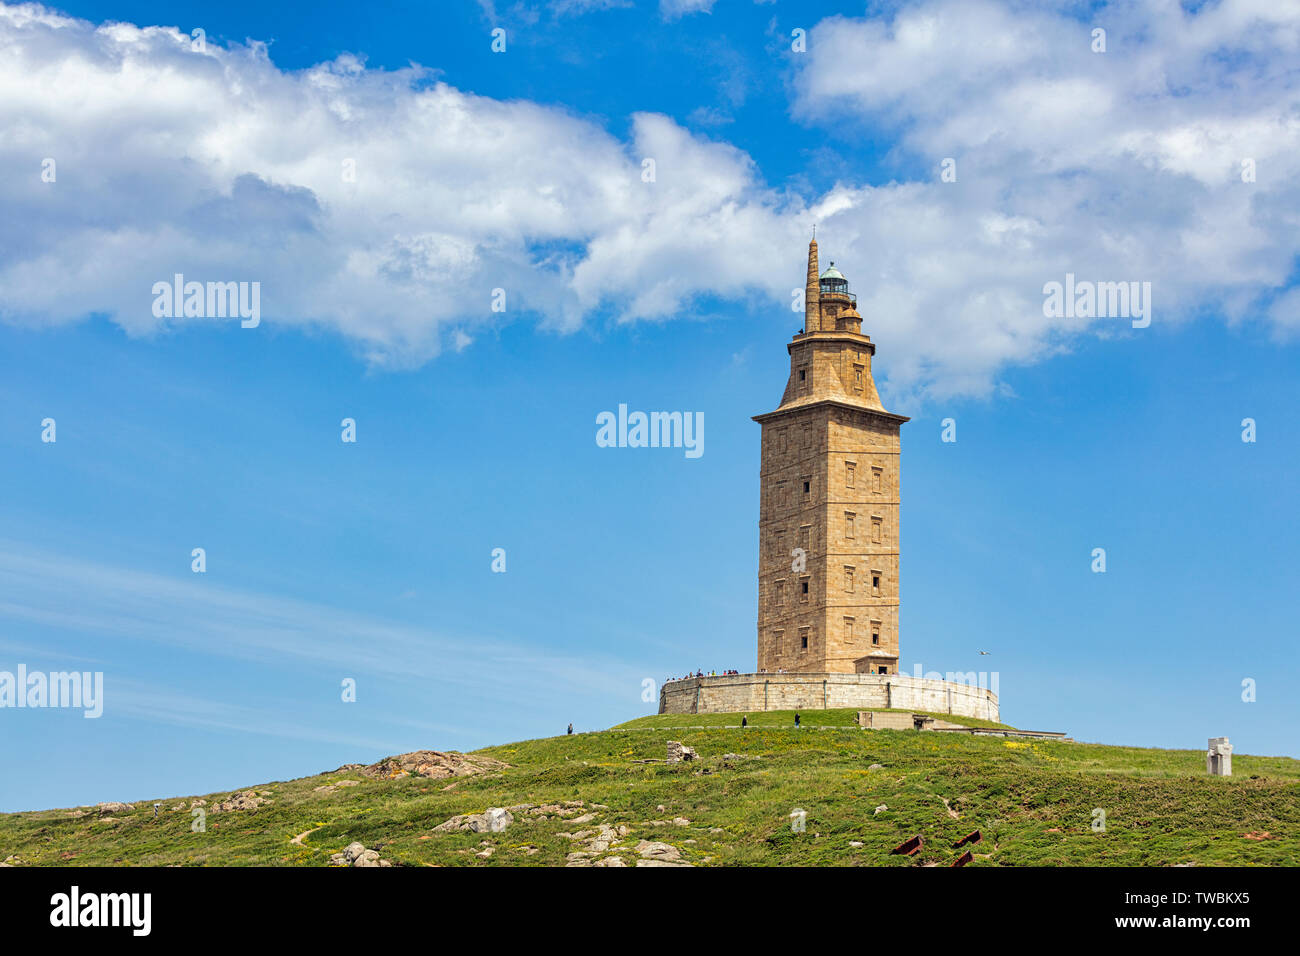 Tower of Hercules, A Coruna, A Coruna Province, Galicia, Spain.  The Tower of Hercules, a UNESCO World Heritage Site, was originally built by the Roma Stock Photo